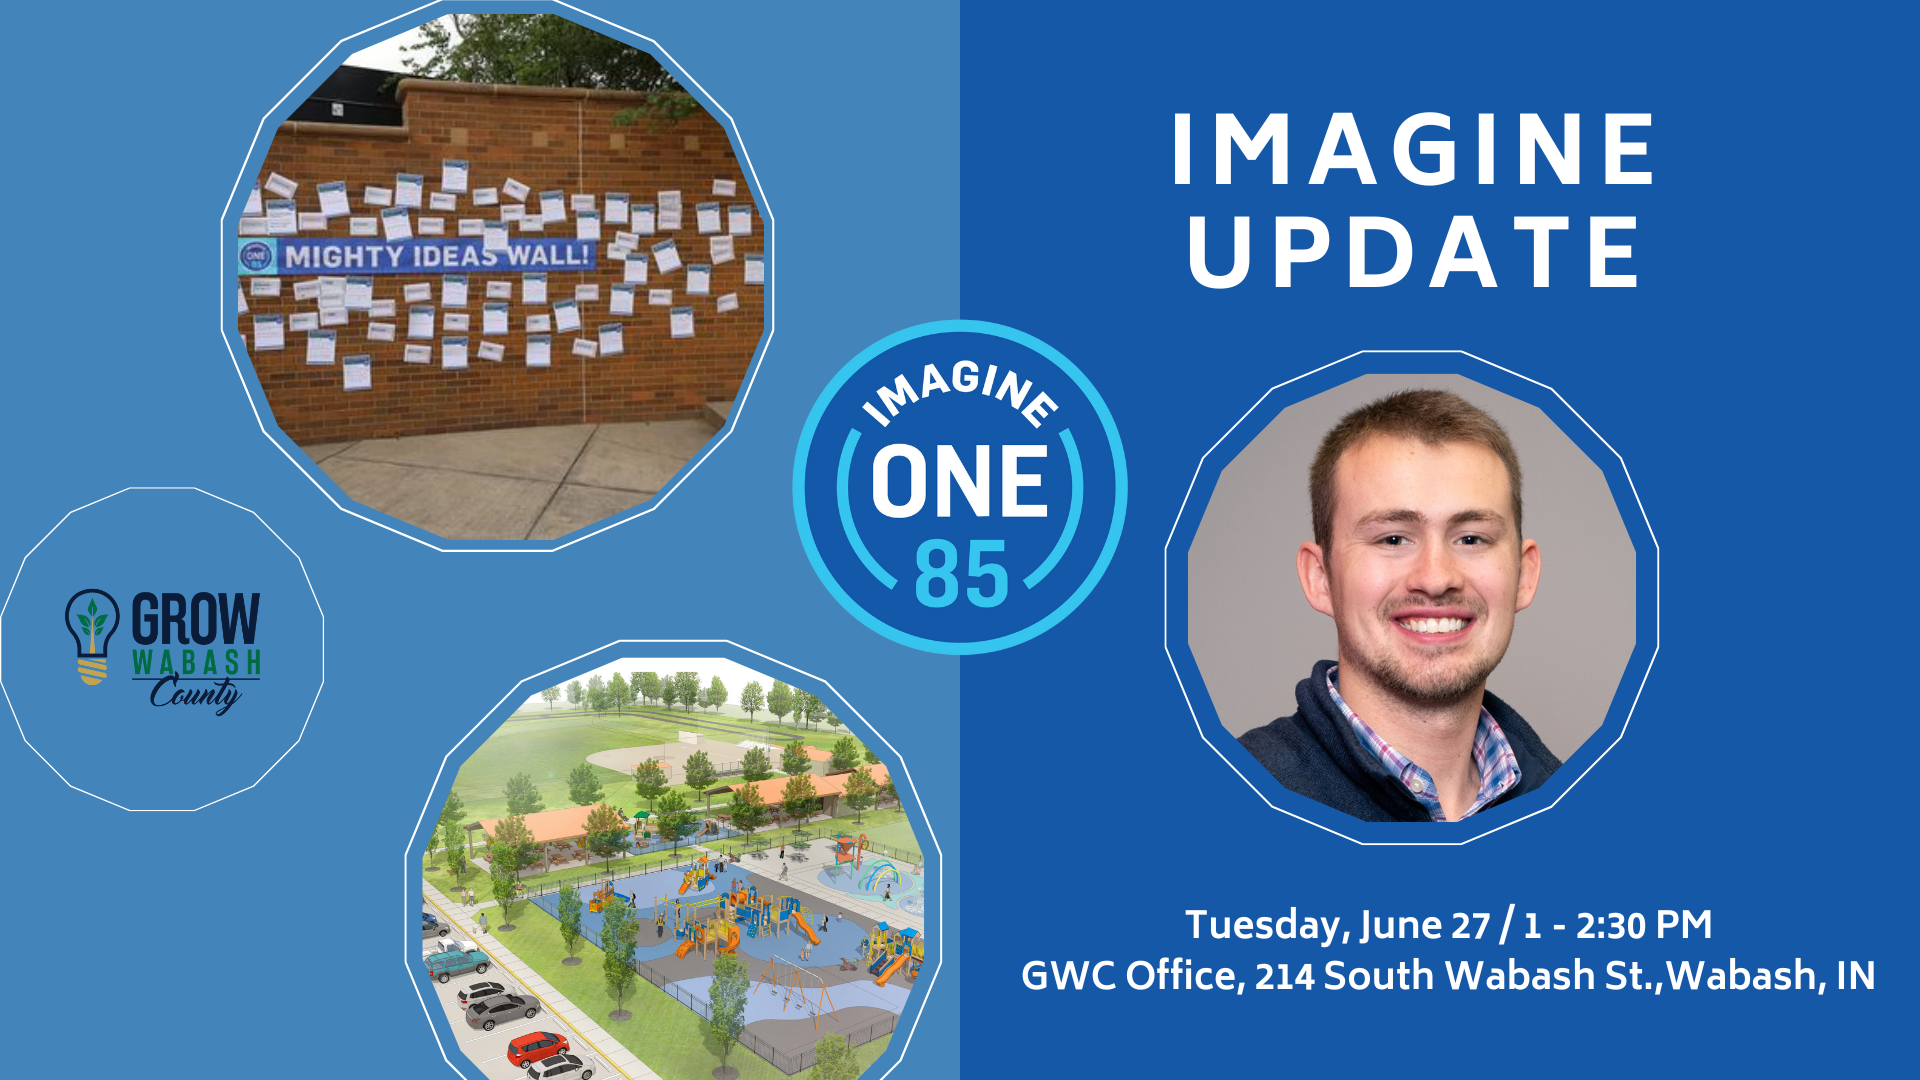 GWC to host Downard for Imagine event Main Photo